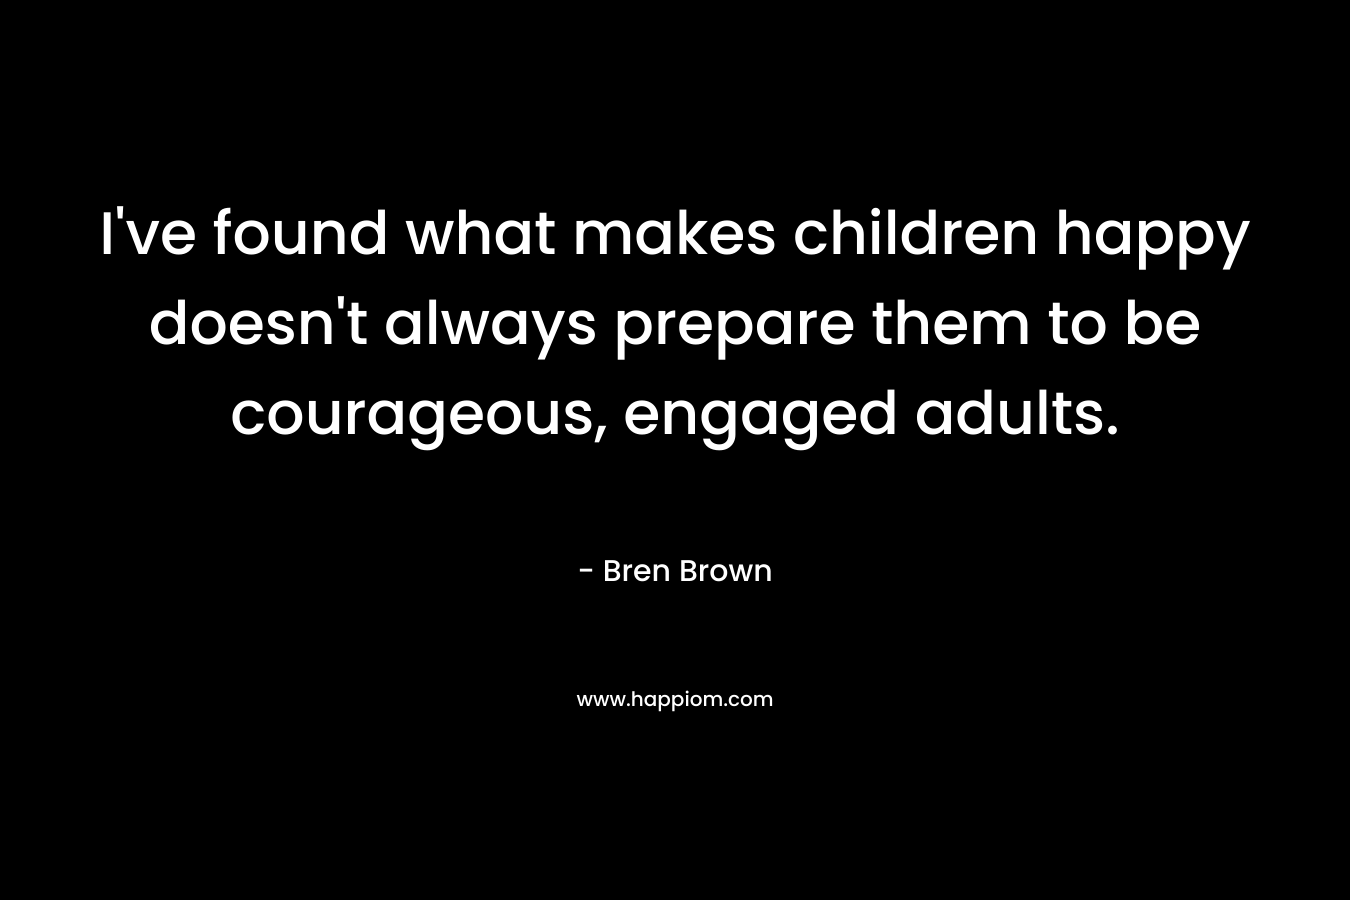 I've found what makes children happy doesn't always prepare them to be courageous, engaged adults.